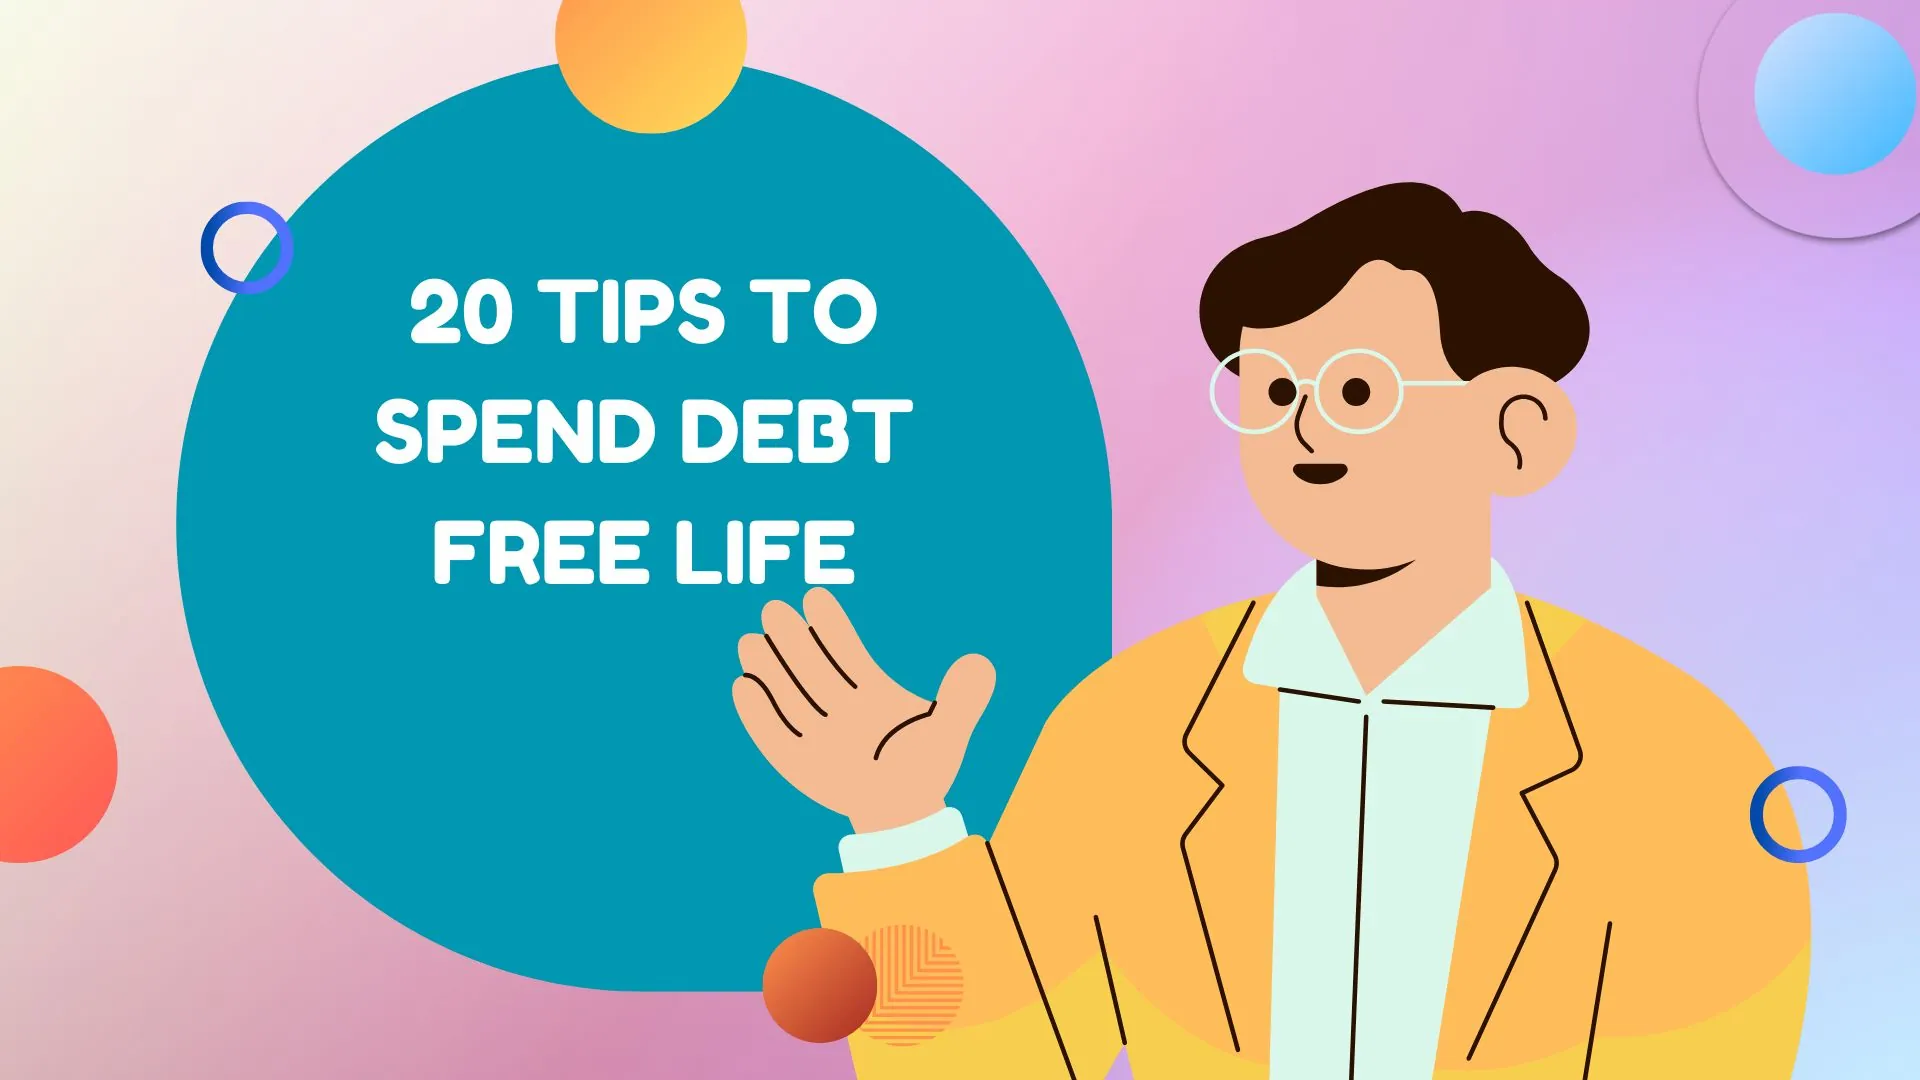 20 Tips To Spend Debt Free Life